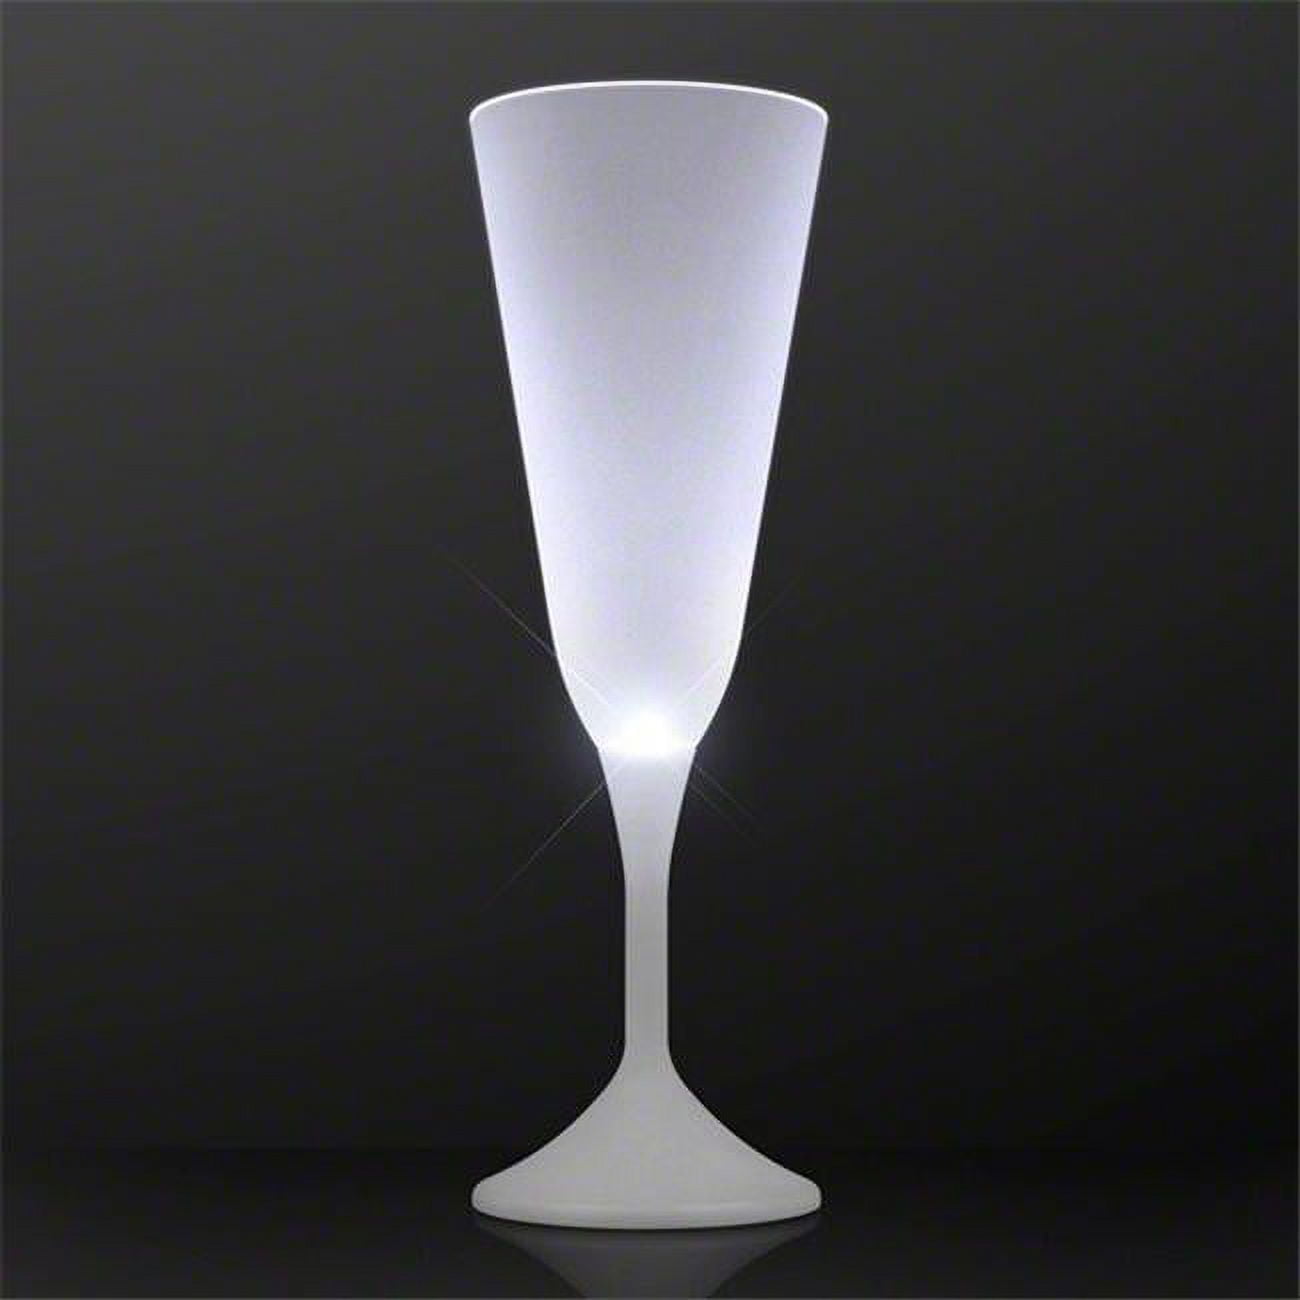 Picture of Blinkee A120 LED Steady White Light Champagne Party Drinking Glass